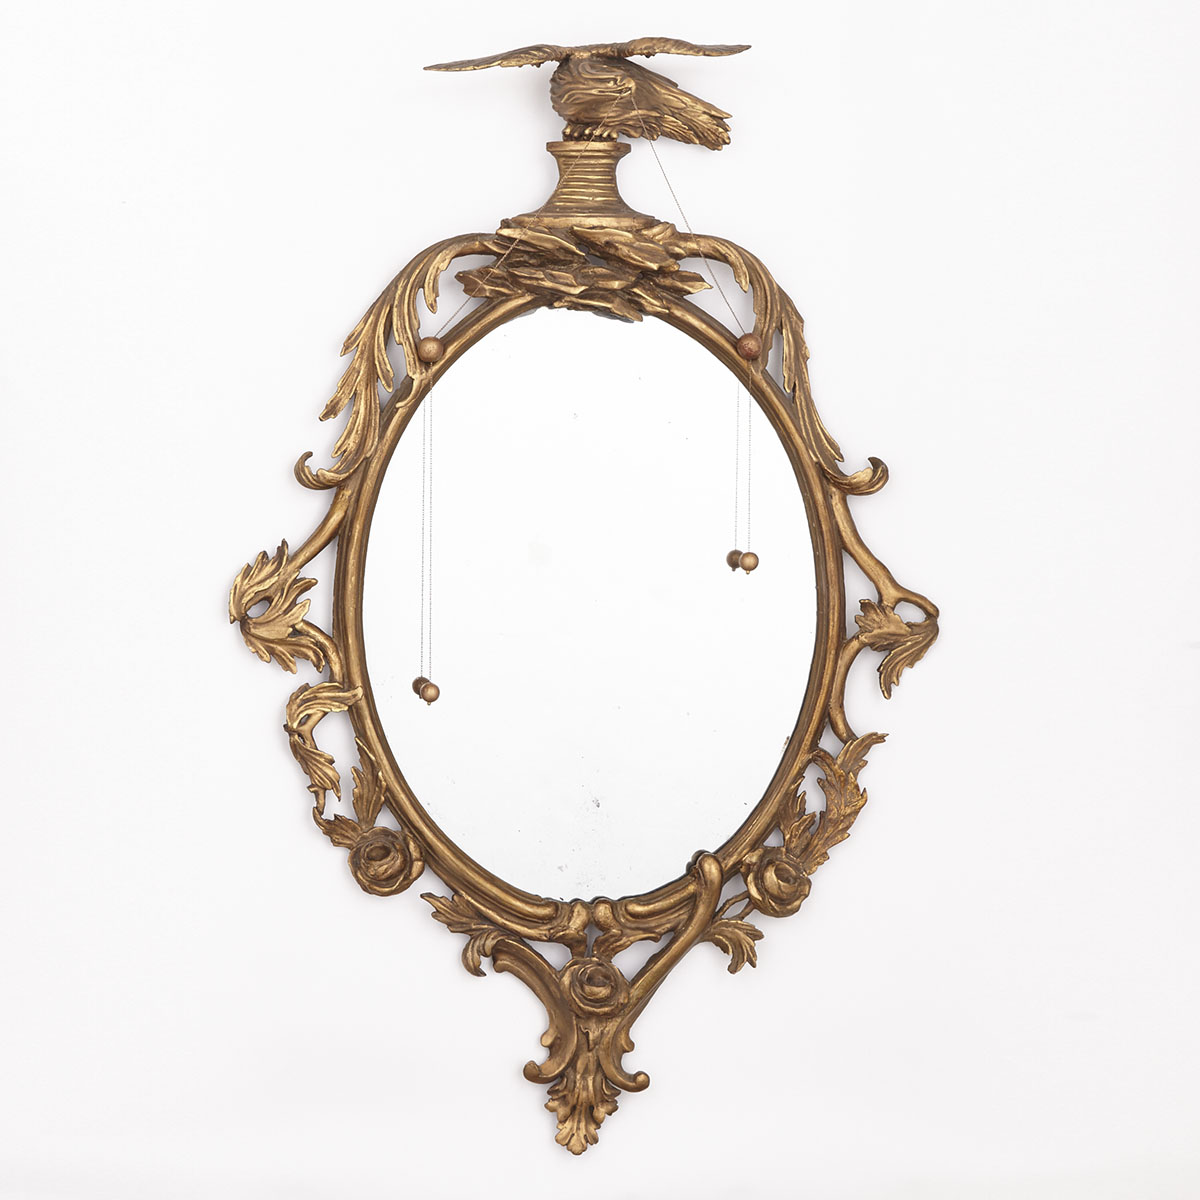 George III Oval Giltwood Mirror with Eagle Crest, early 19th century